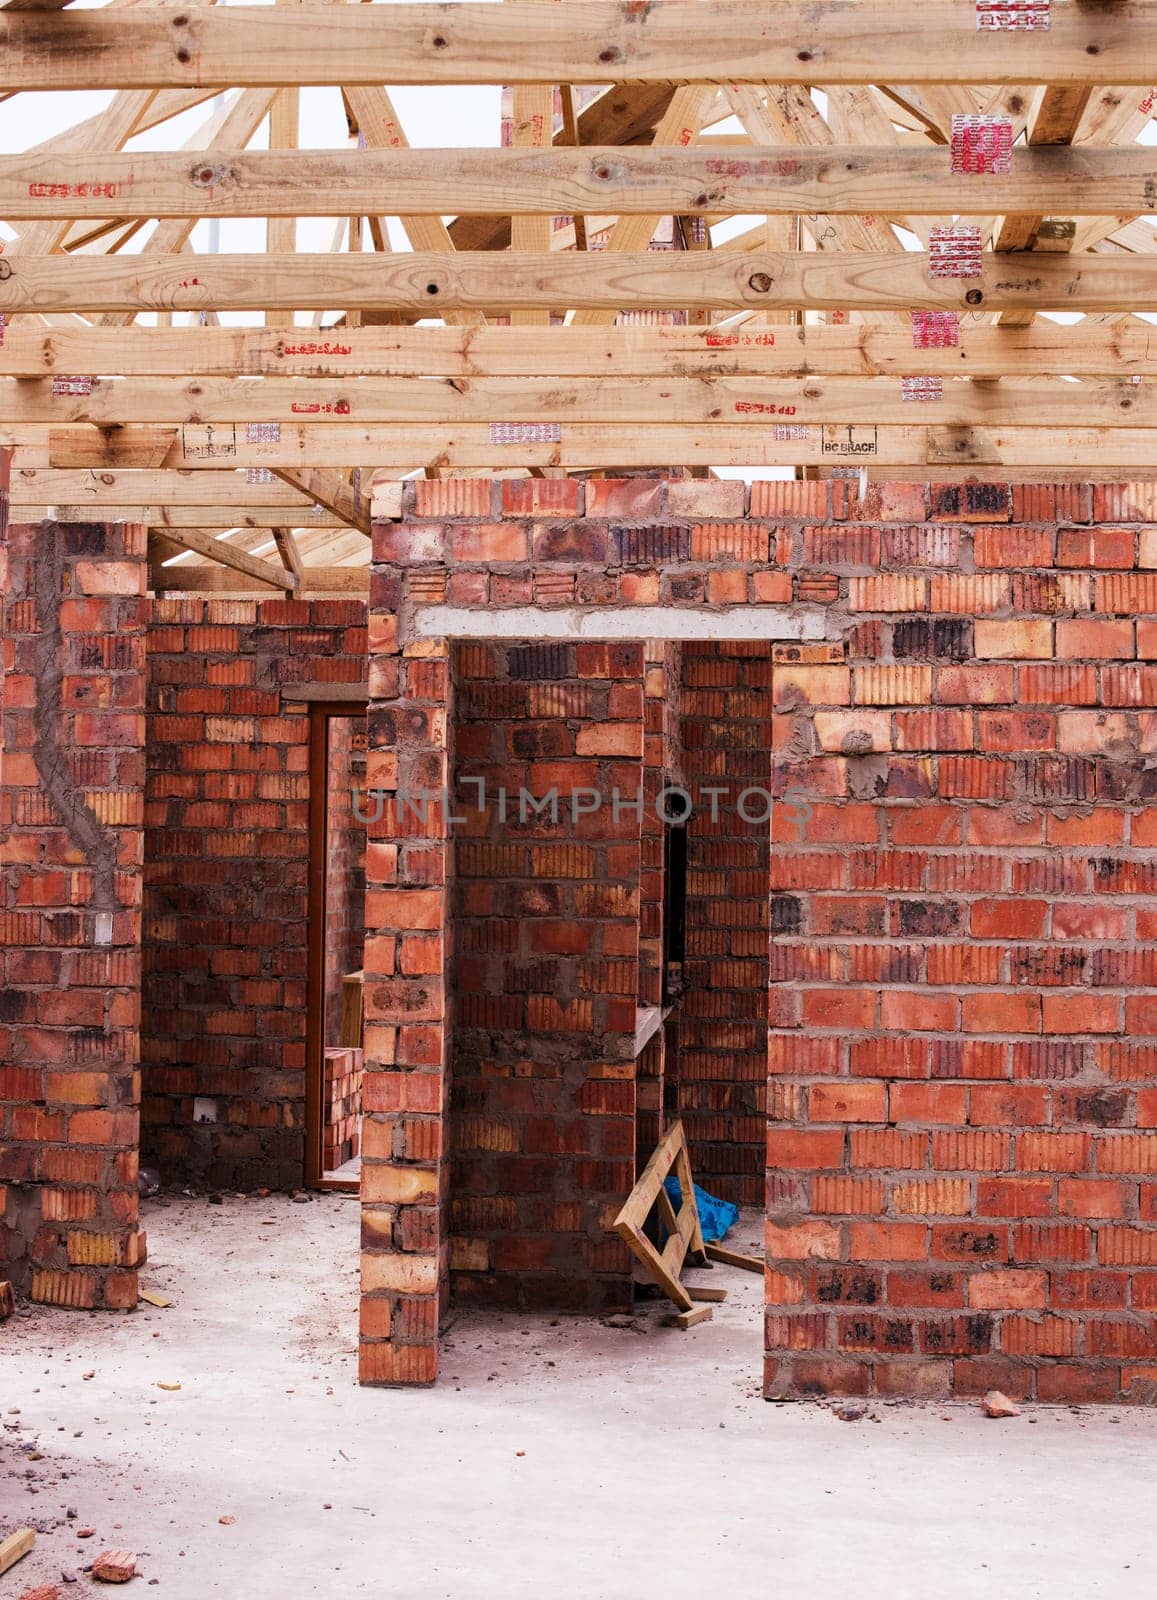 Property, brick wall and new real estate project for construction, development and dream home frame. House, building and architecture with structure, worksite and suburban improvement and design by YuriArcurs